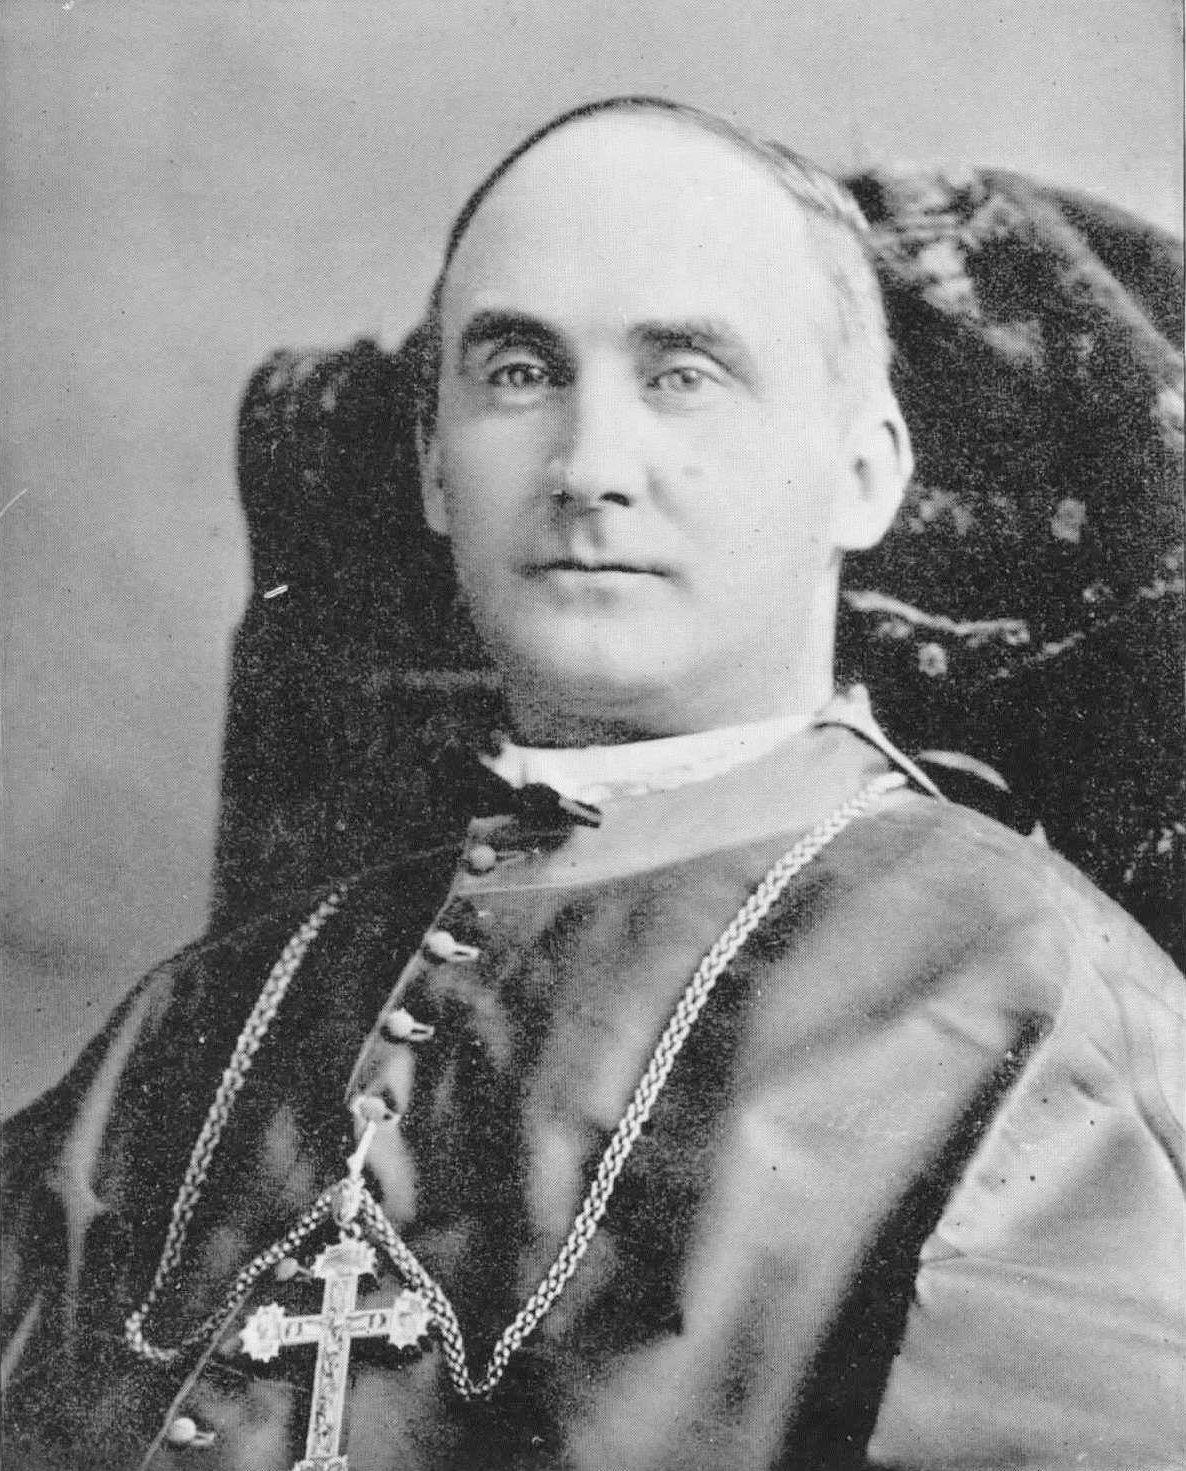 An 1889 photo of Bishop Harkins from the Consecration of the Cathedral souvenir book.